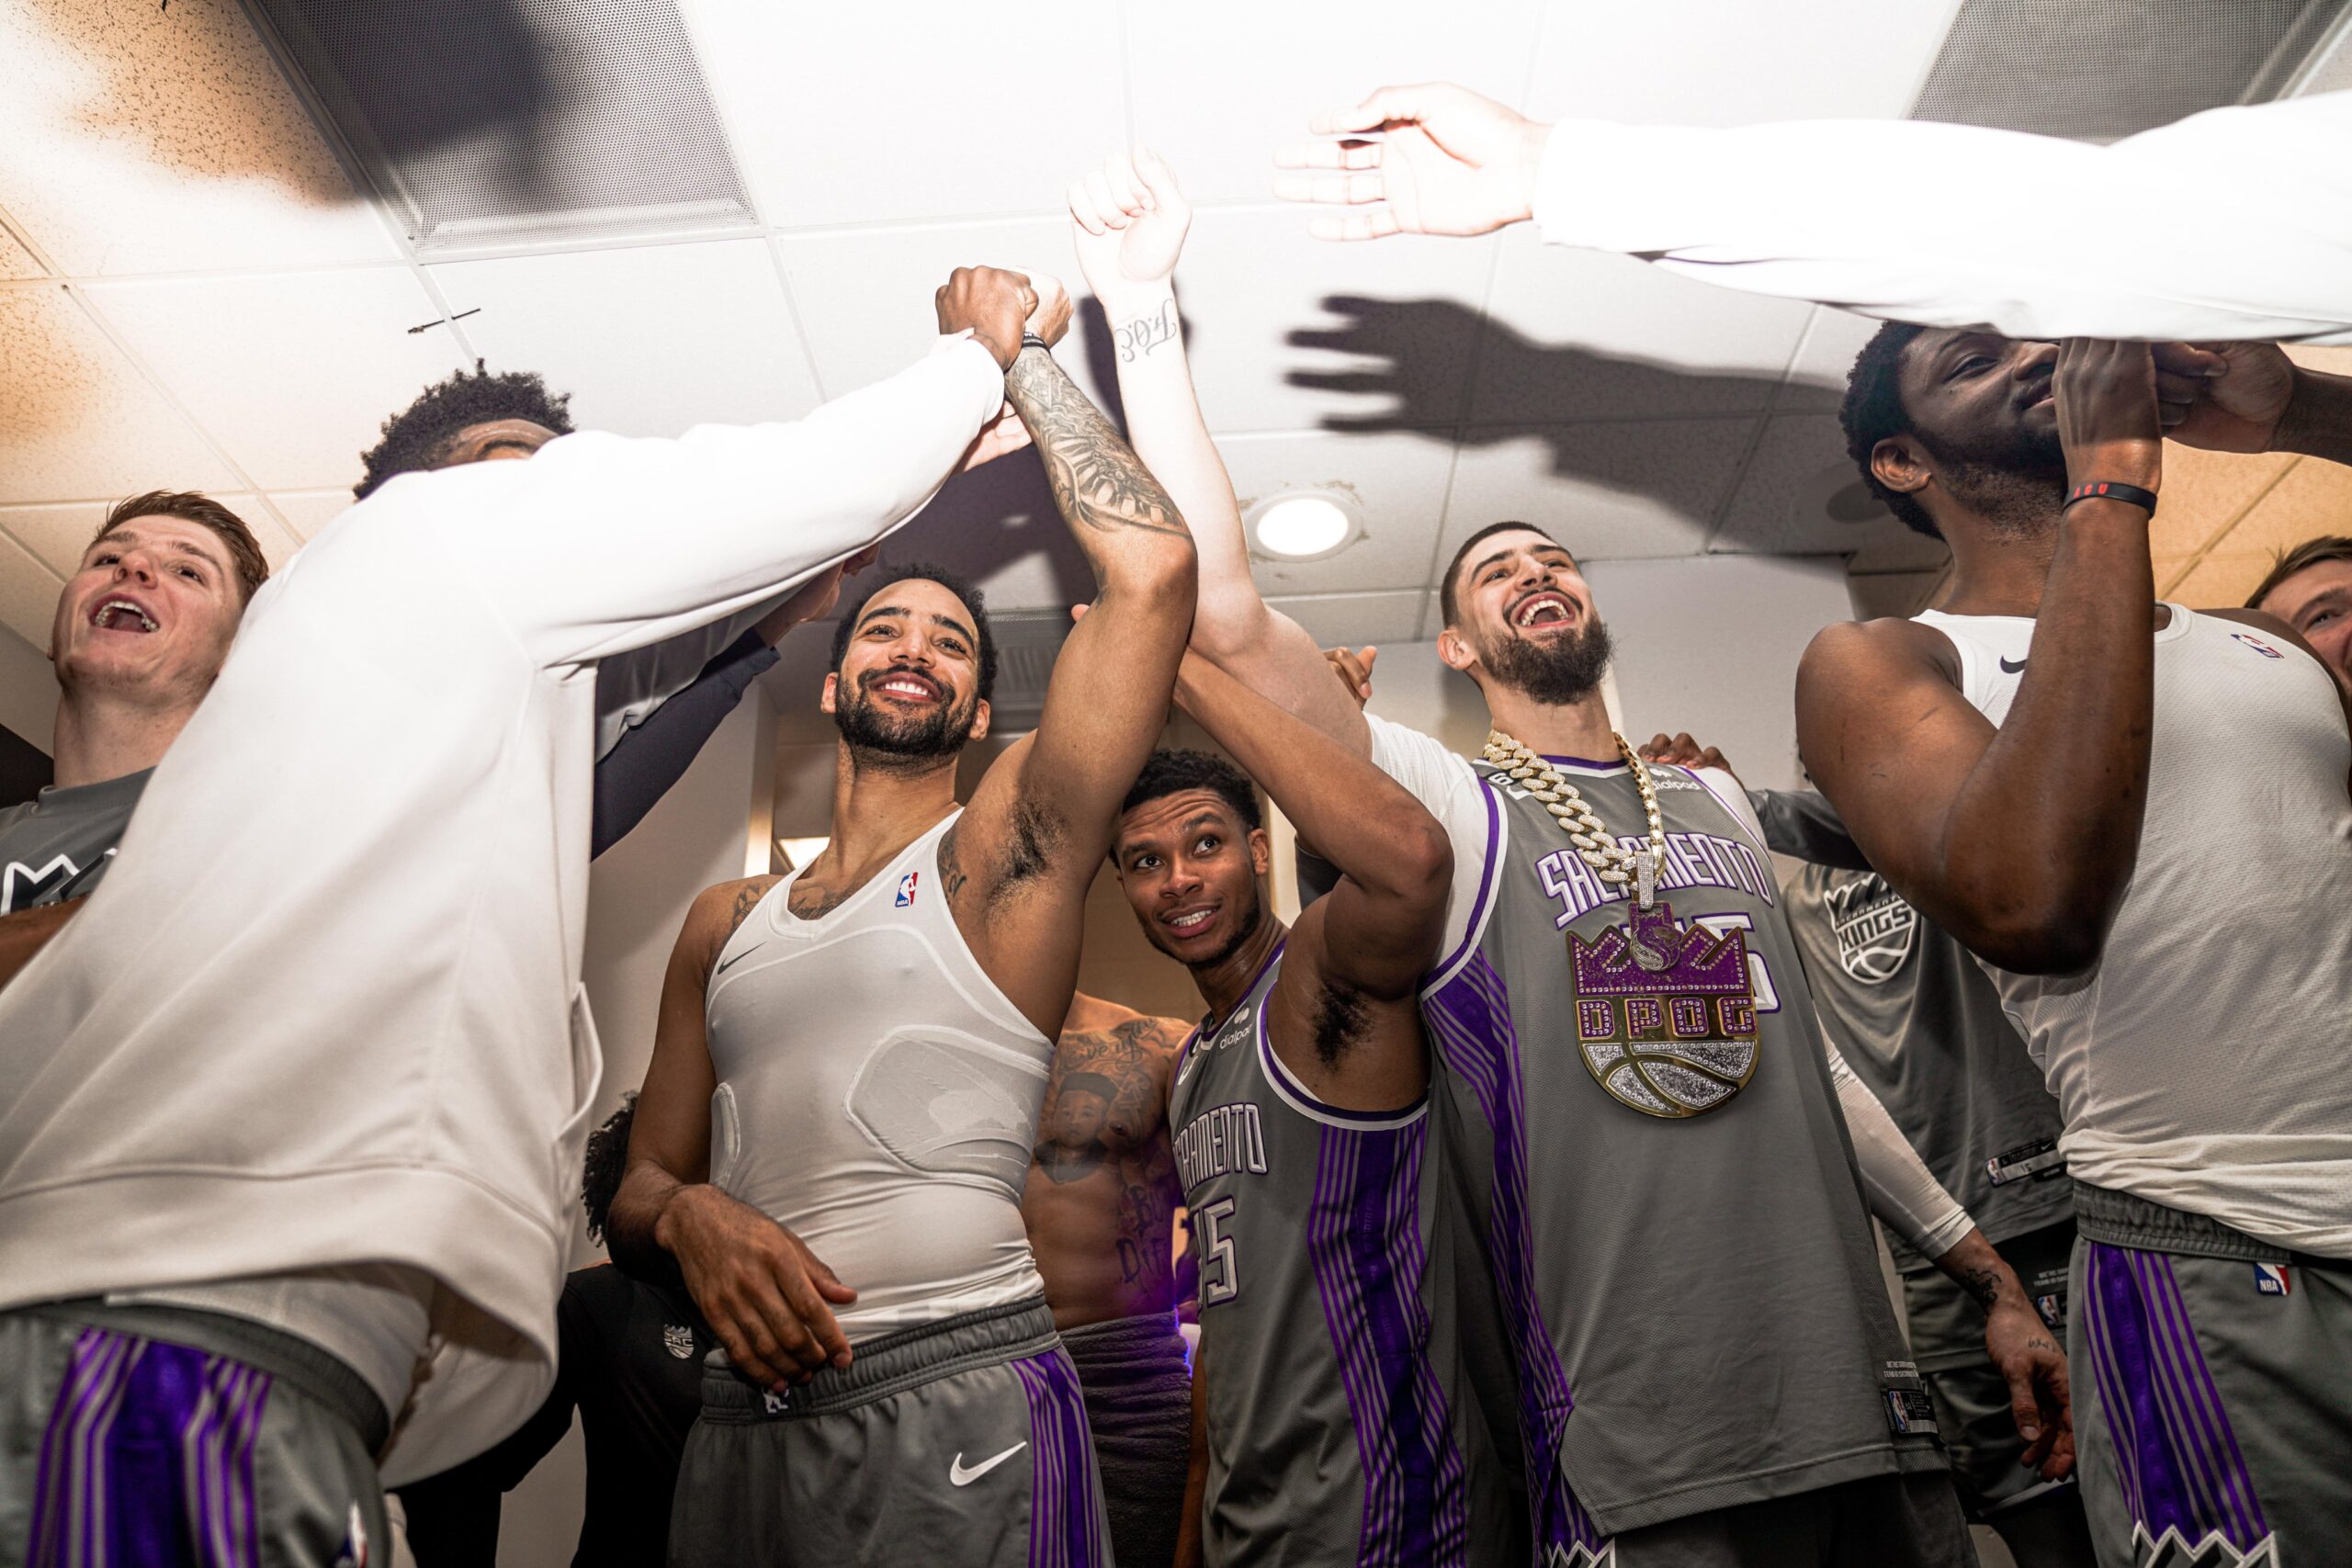 Kings clinch 1st playoff berth since 2006, ending 16-season drought